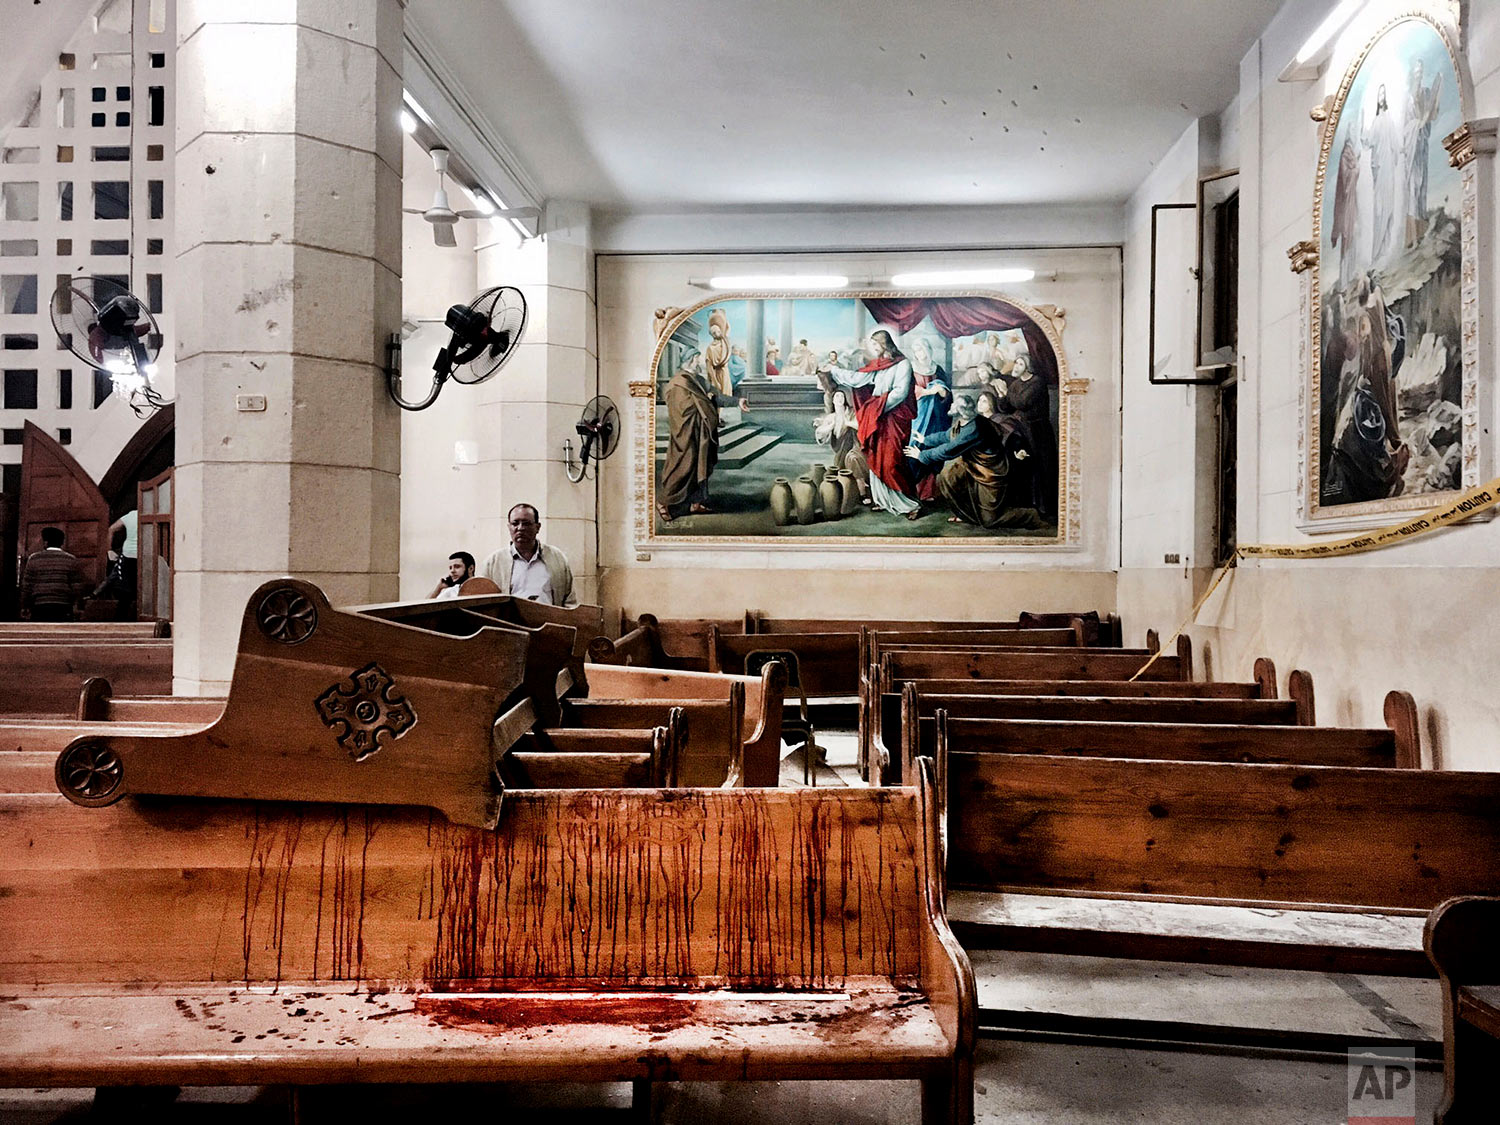  Blood stains pews inside the St. George Church after a suicide bombing, in the Nile Delta town of Tanta, Egypt, Sunday, April 9, 2017. Bombs exploded at two Coptic churches in the northern Egyptian cities of Tanta and Alexandria as worshippers were celebrating Palm Sunday, killing over 40 people and wounding scores more in assaults claimed by the Islamic State group. (AP Photo/Nariman El-Mofty) 